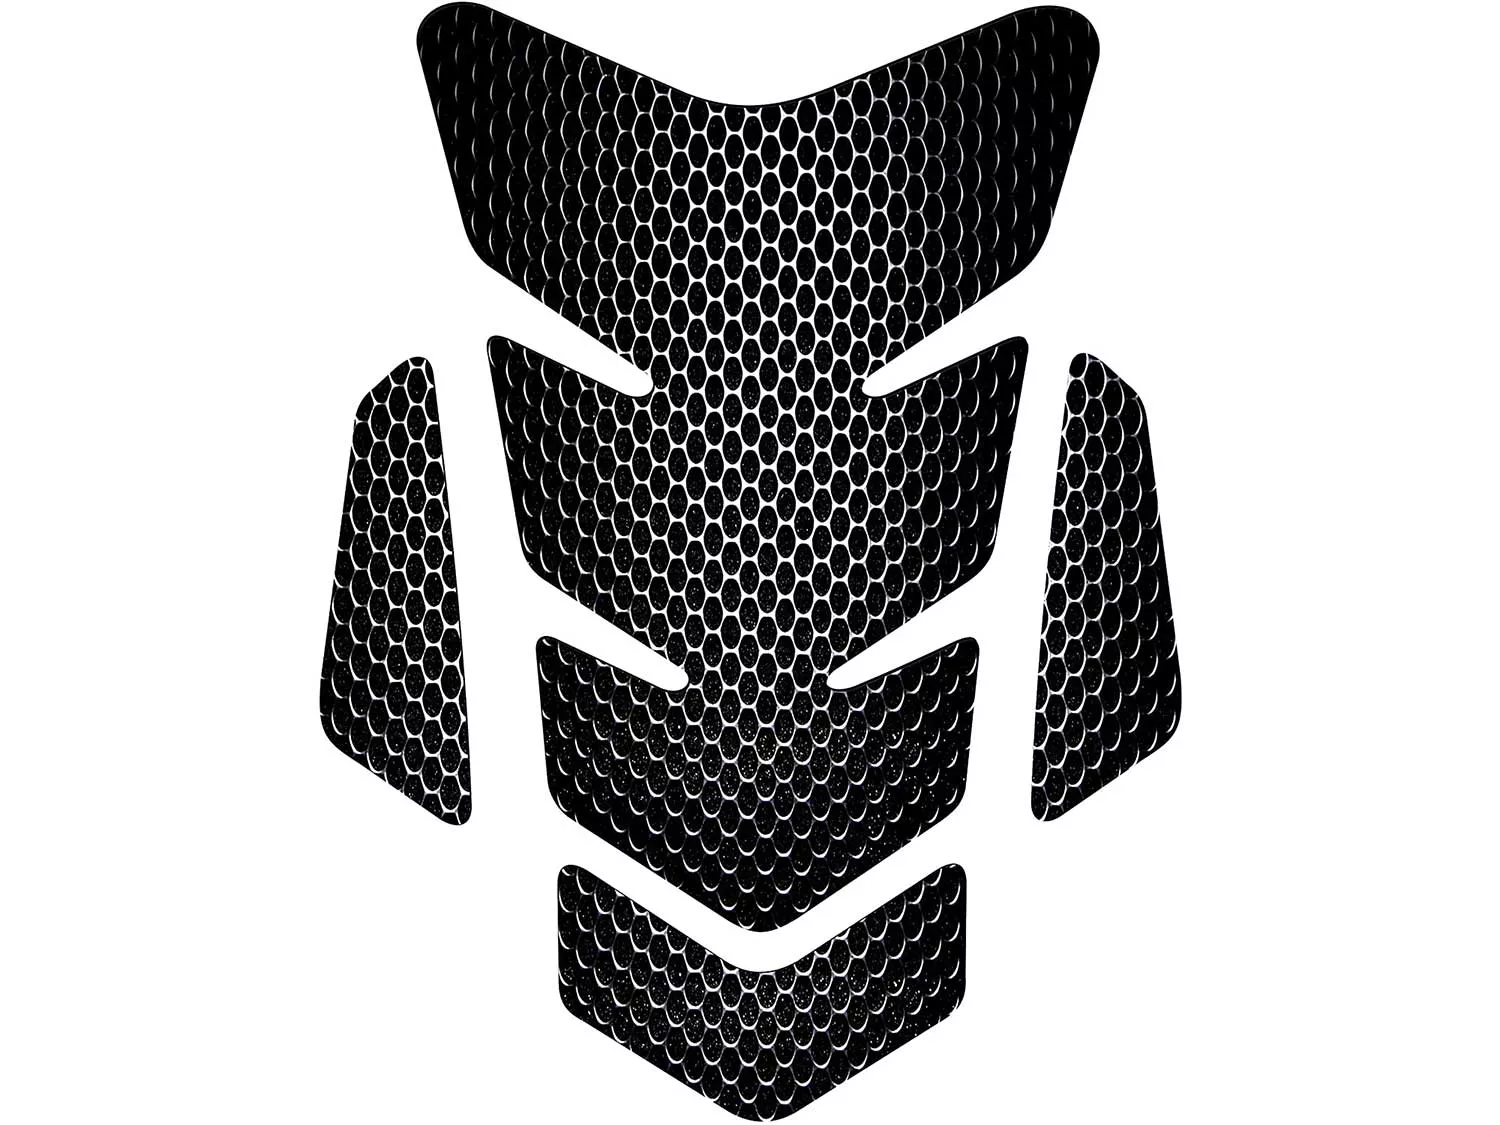 OTOLIMAN 3D Motorcycle Carbon Fiber Vinyl Gel Gas Tank Pad Protector Decal and Sticker Tankpad